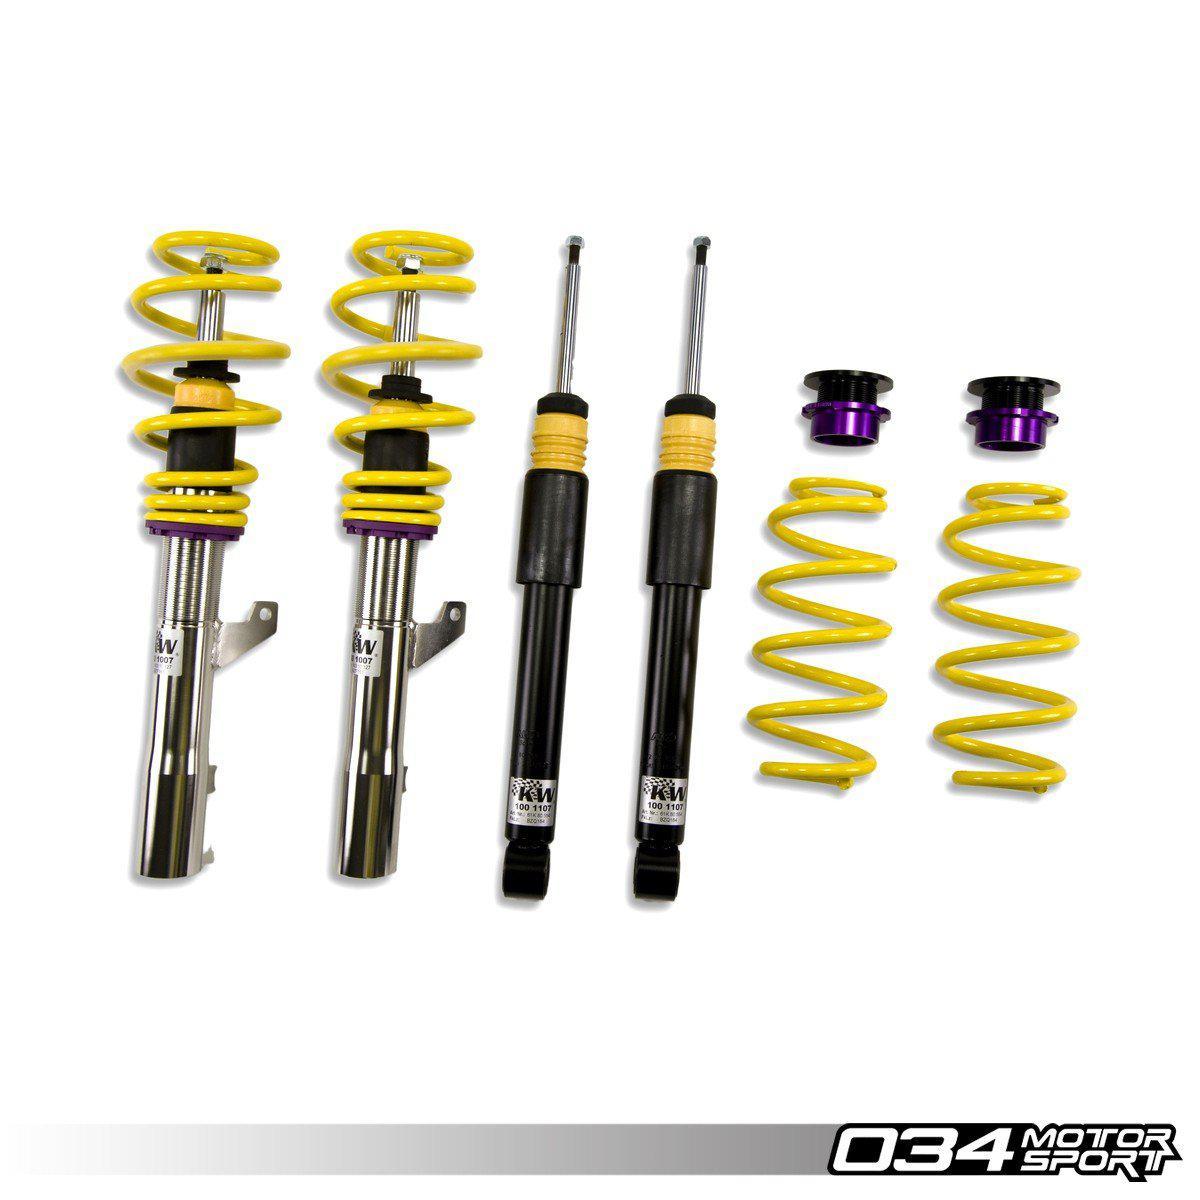 KW Variant 3 Coilover Suspension, B8 Audi A4/A5/S4/S5 FWD & Quattro With Electronic Dampening-A Little Tuning Co